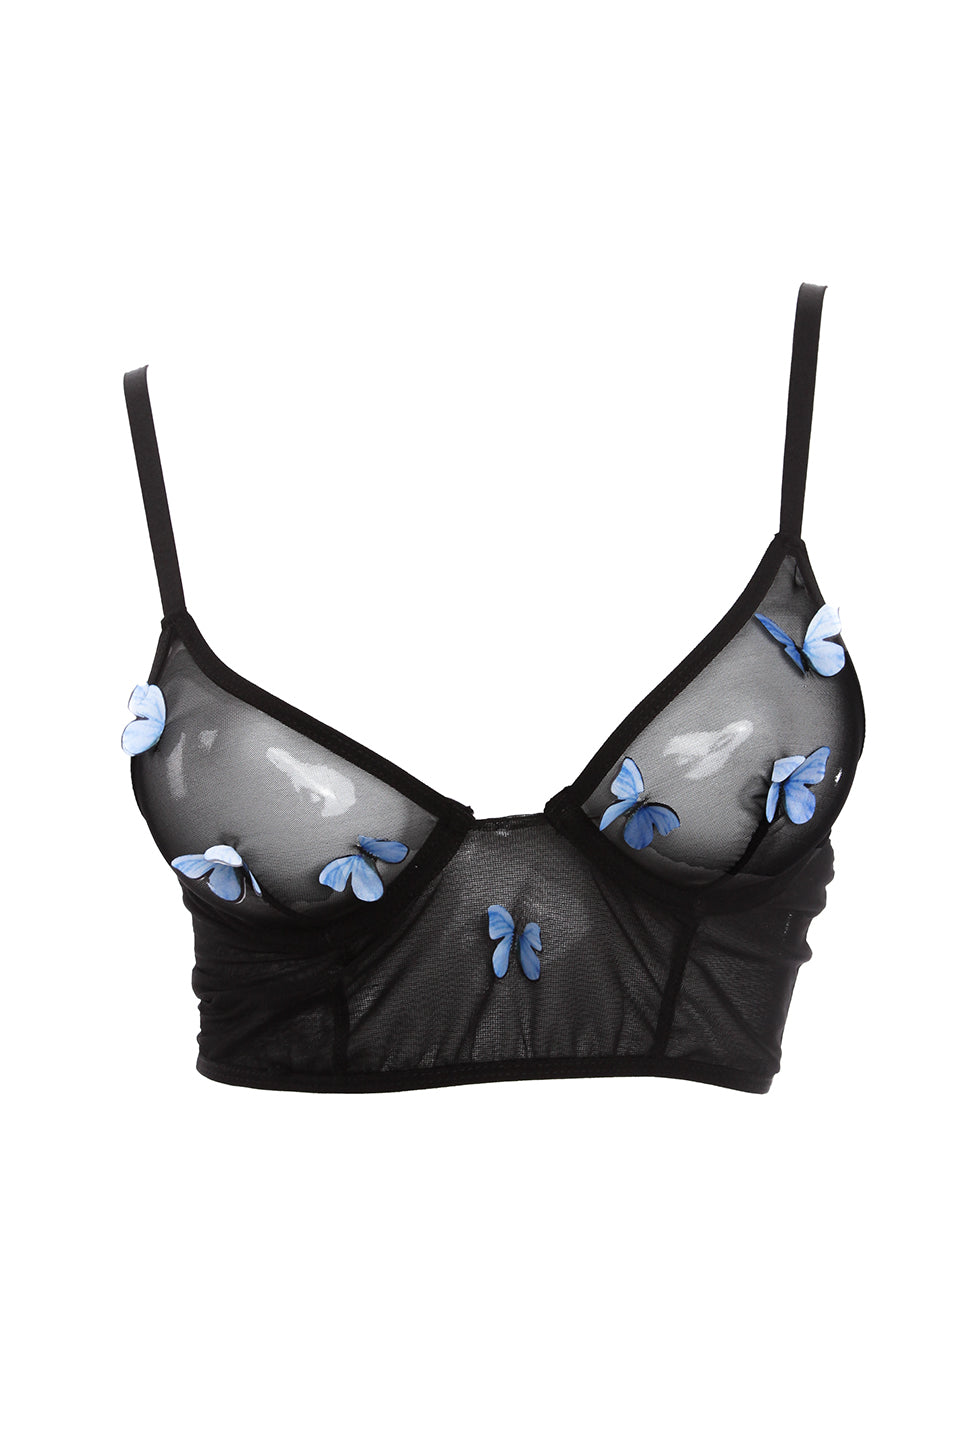 The Midnight Butterfly Bralette - HPK Personalized Products and more